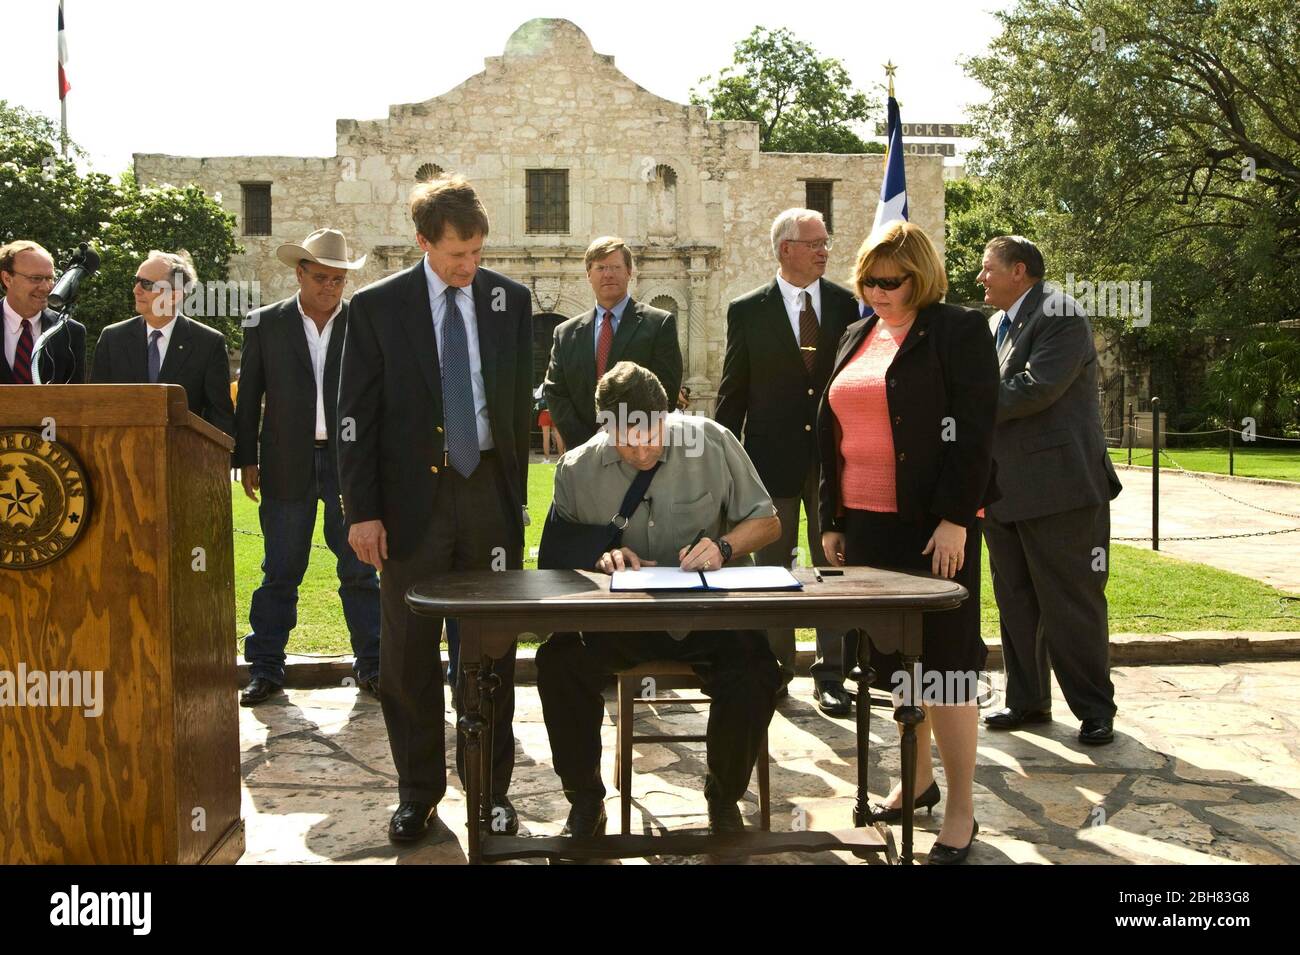 San Antonio Texas USA, June 15th, 2009: Texas Governor Rick Perry signs legislation protecting Texas property owners during a ceremony in front of the Alamo. Perry's right arm is in a sling after he broke his collarbone in a bicycle accident. ©Marjorie Kamys Cotera/Bob Daemmrich Photography Stock Photo